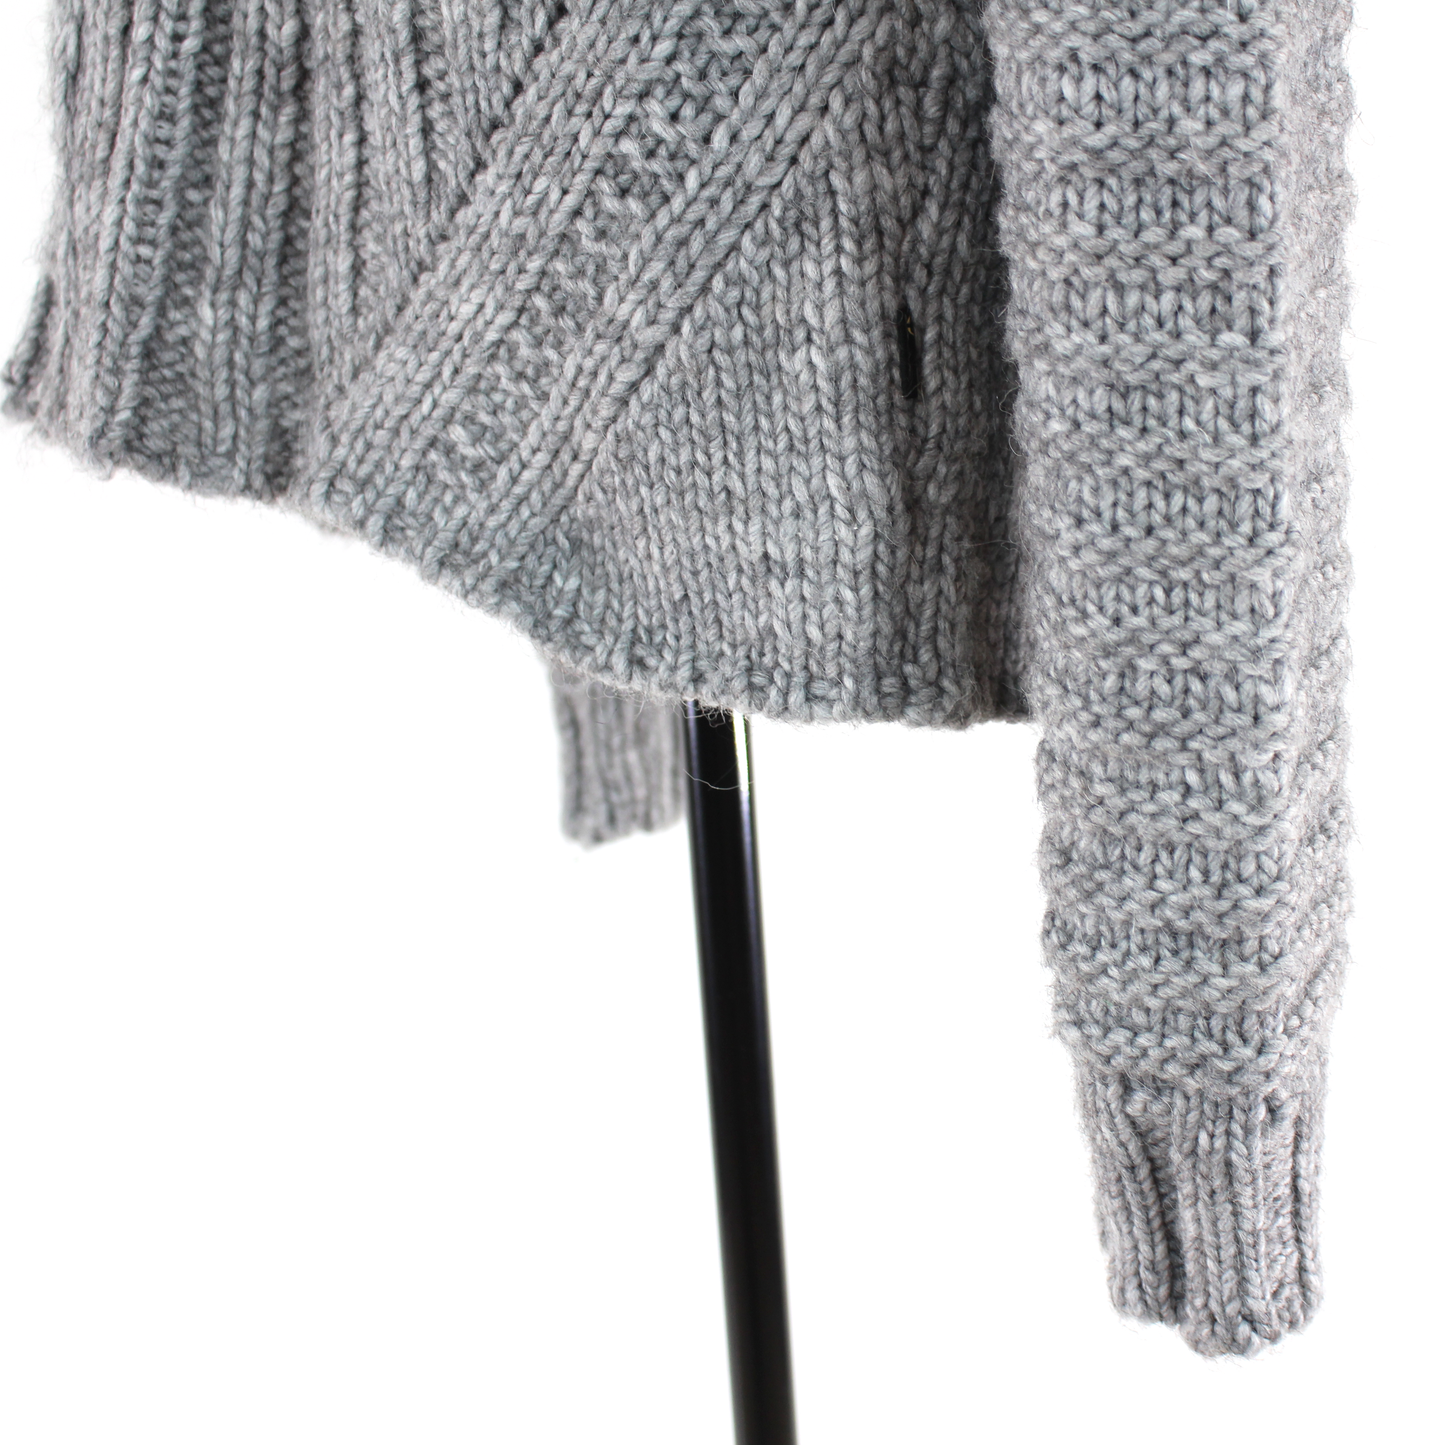 Just Cavalli Cable Knit Cardigan